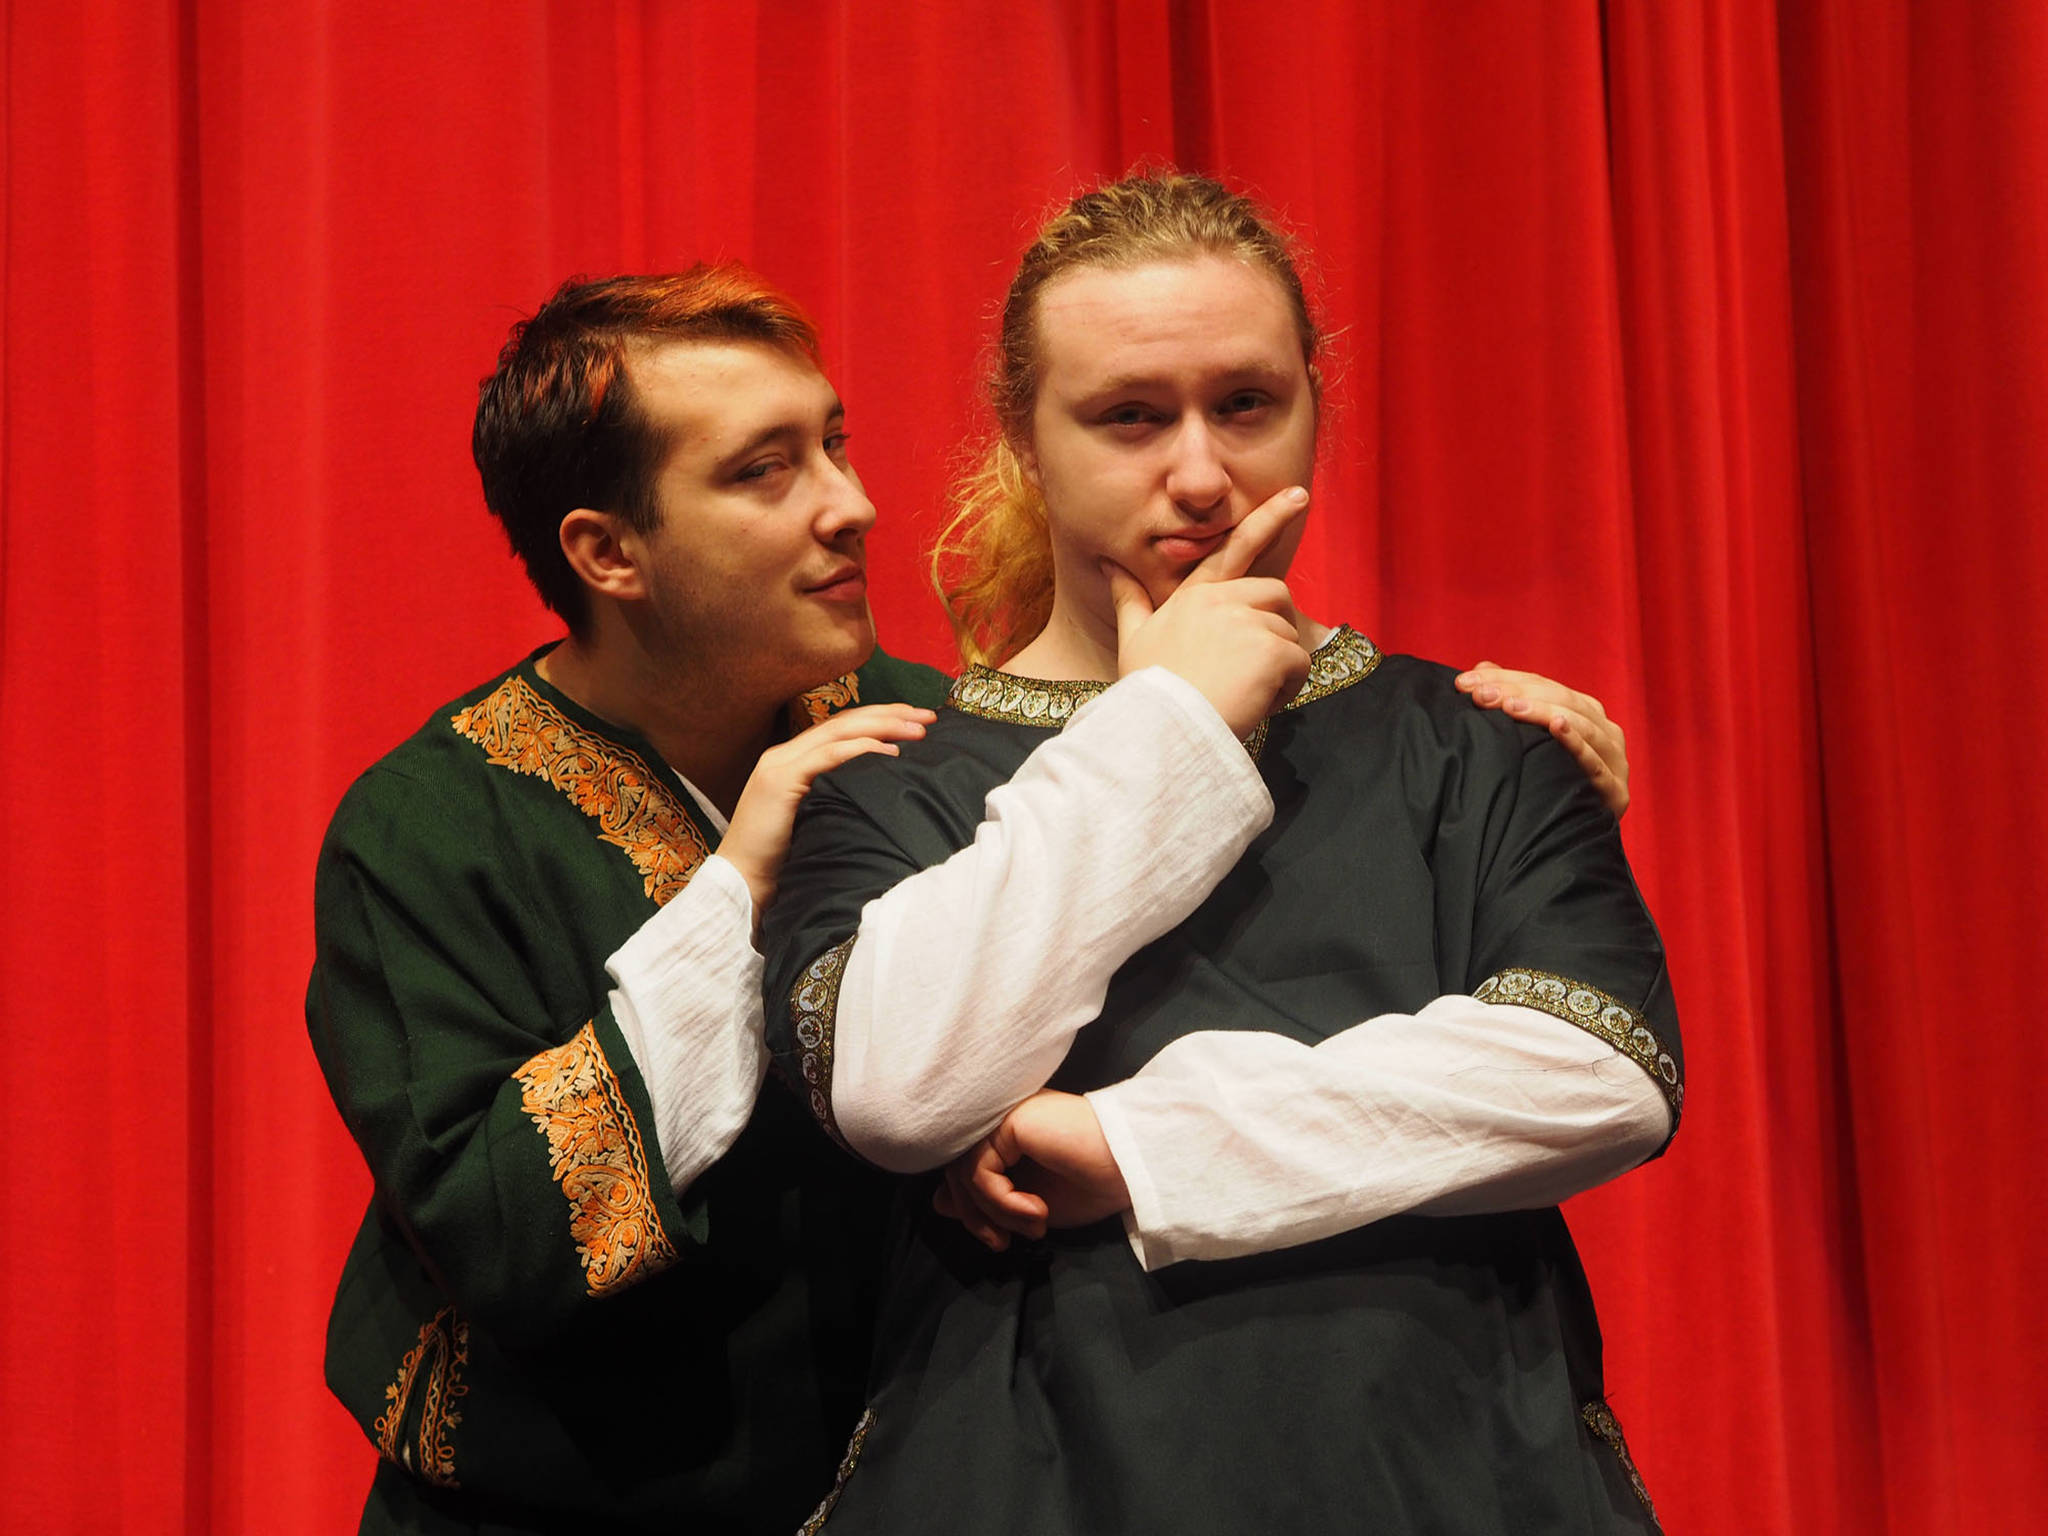 Riyan Stossel, left, as Prince Geoffrey, and Dominic Stosse, right, as Prince John in the Merry Trickers of Haines’ production of “The Lion in Winter.” Photos by John Hagen.